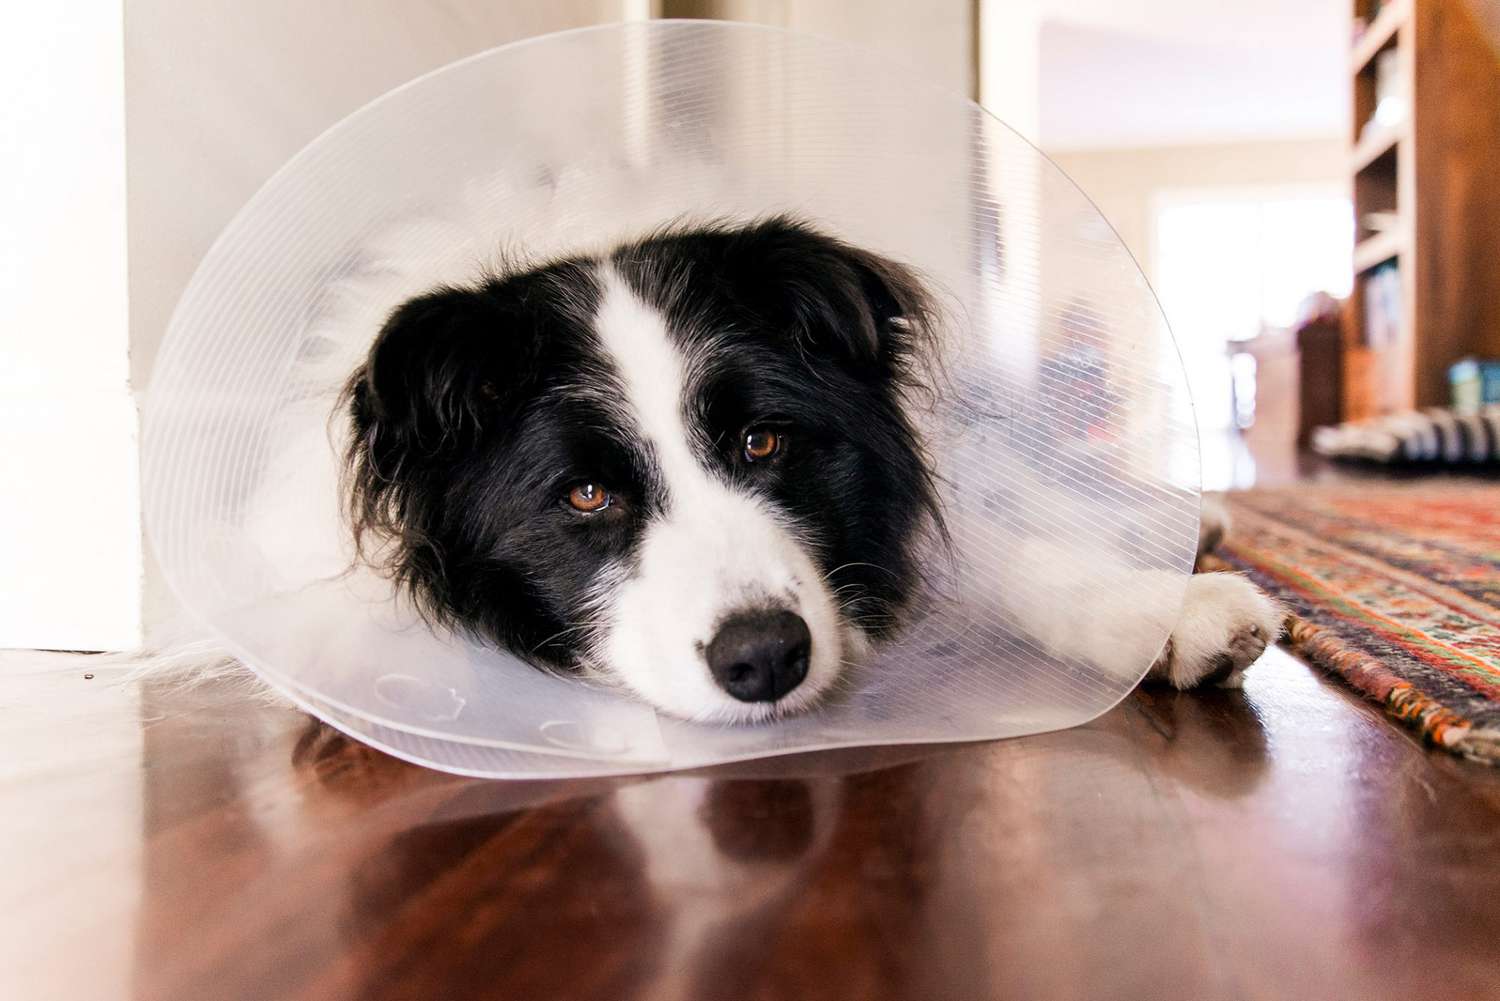 What You Should Know If Your Dog Needs to Wear a Cone | Daily Paws